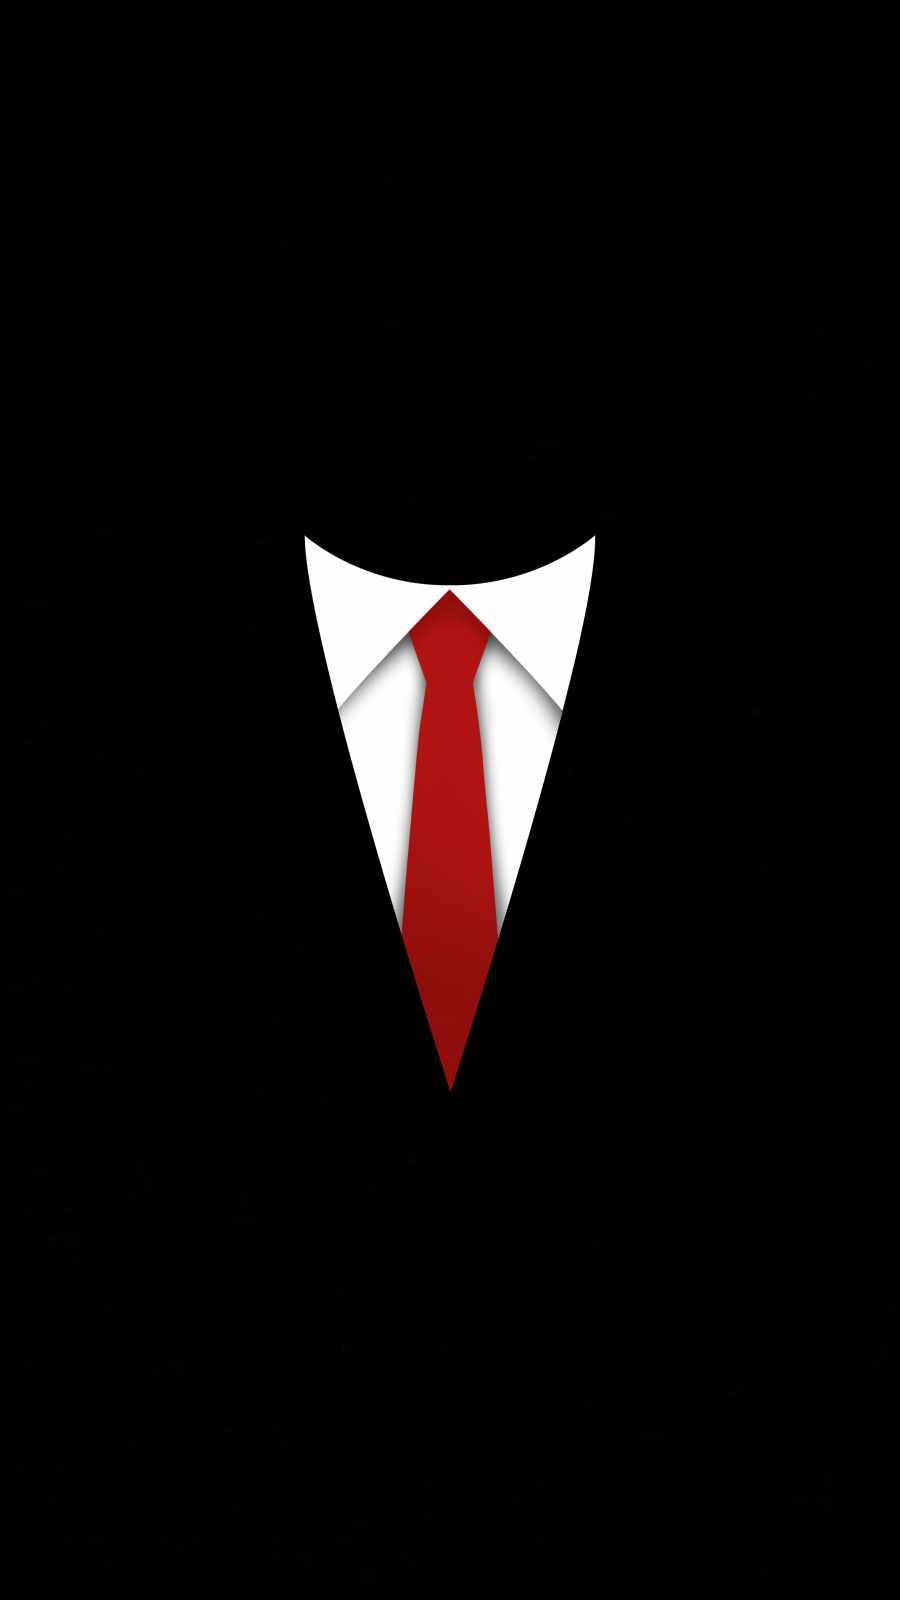 Black Suit And Tie - IPhone Wallpapers : iPhone Wallpapers